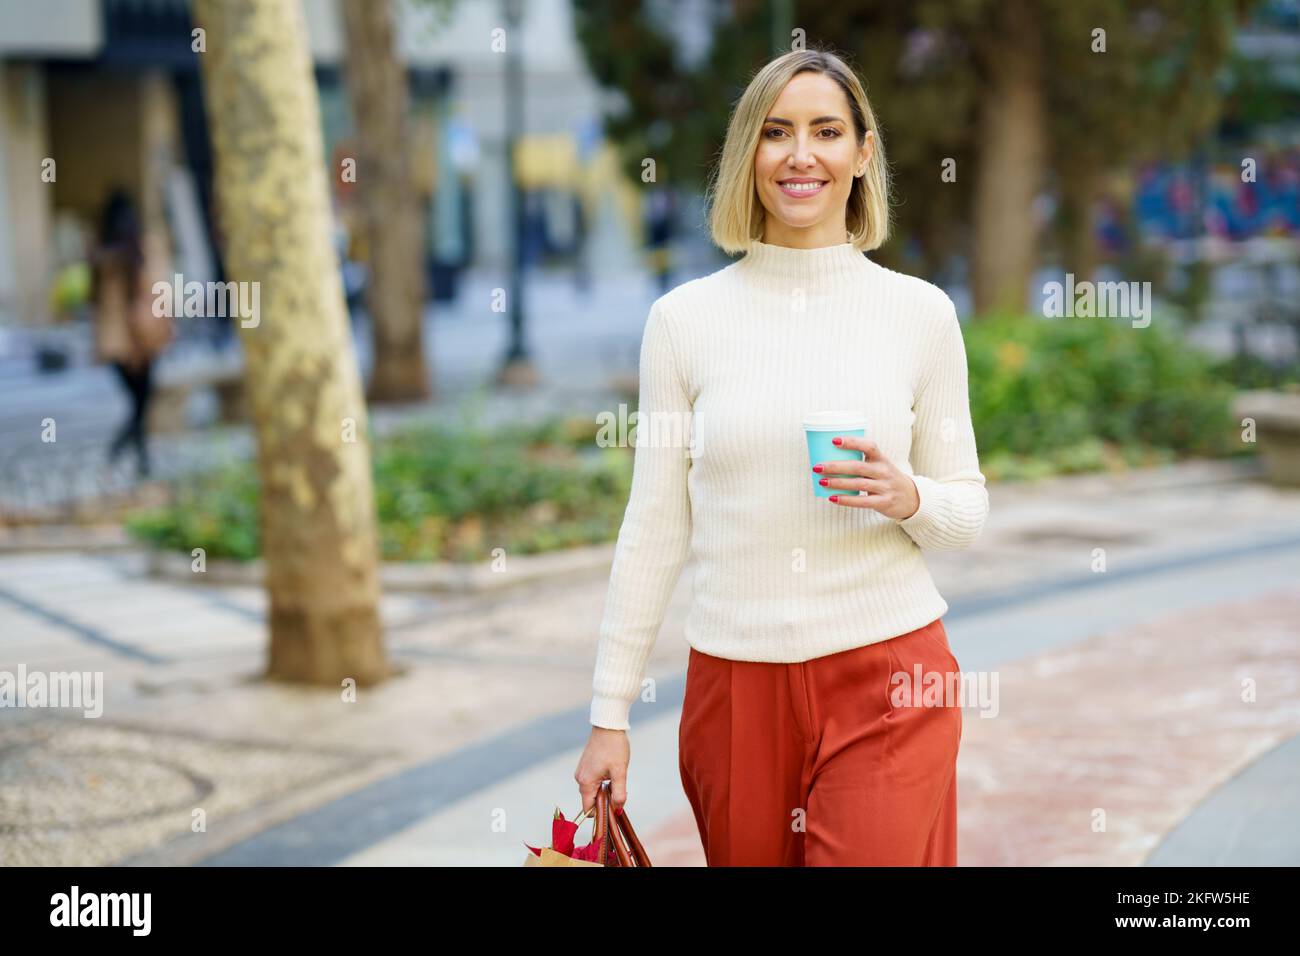 Smiling woman with cup of beverage carrying paper bag Stock Photo